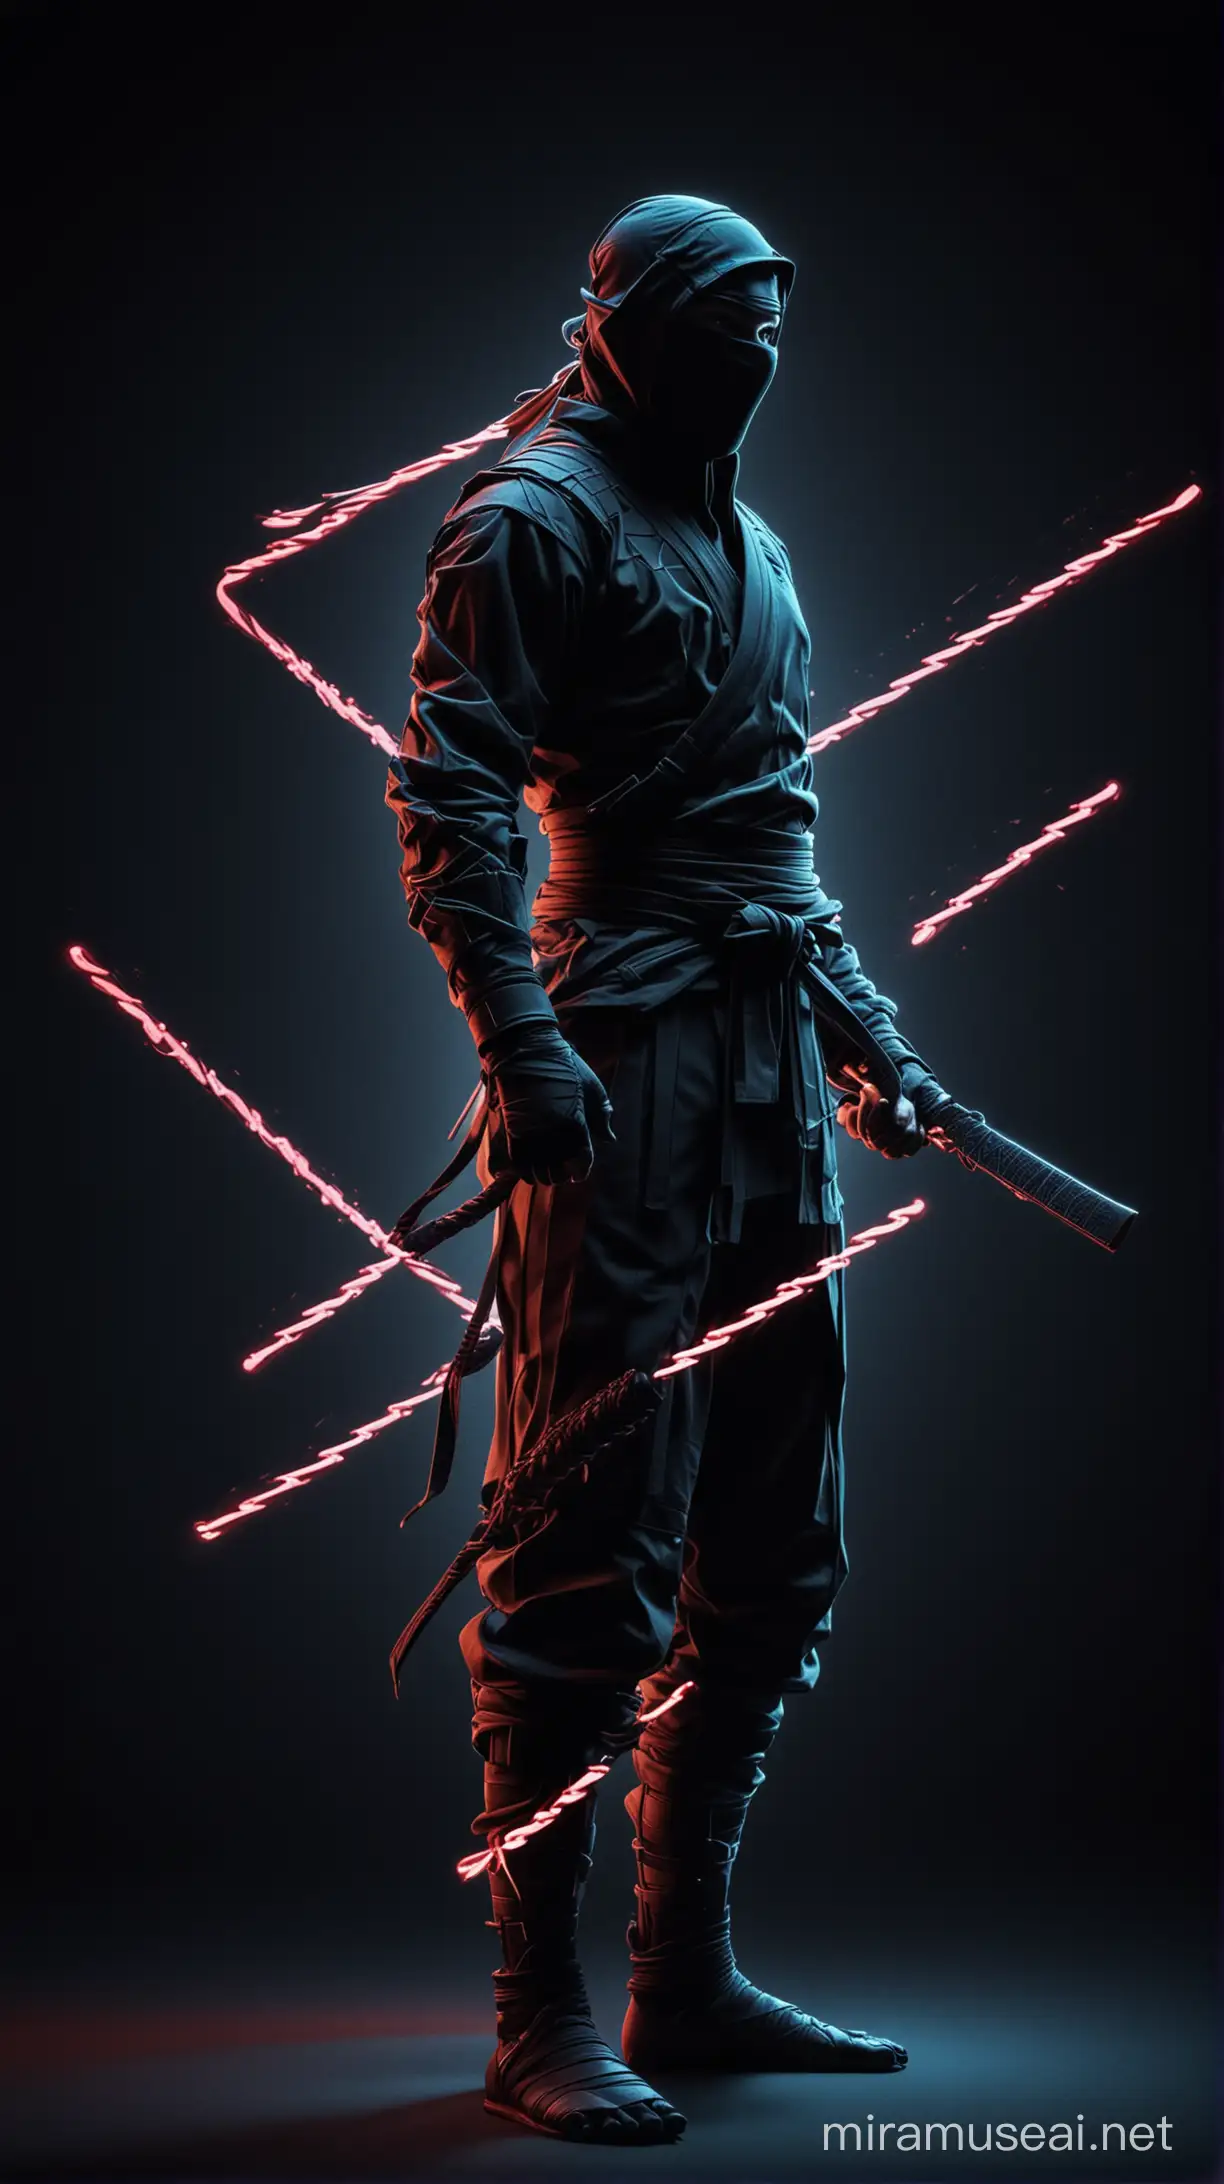 Mysterious Neon Ninja Abstract Composition in Meditative Pose